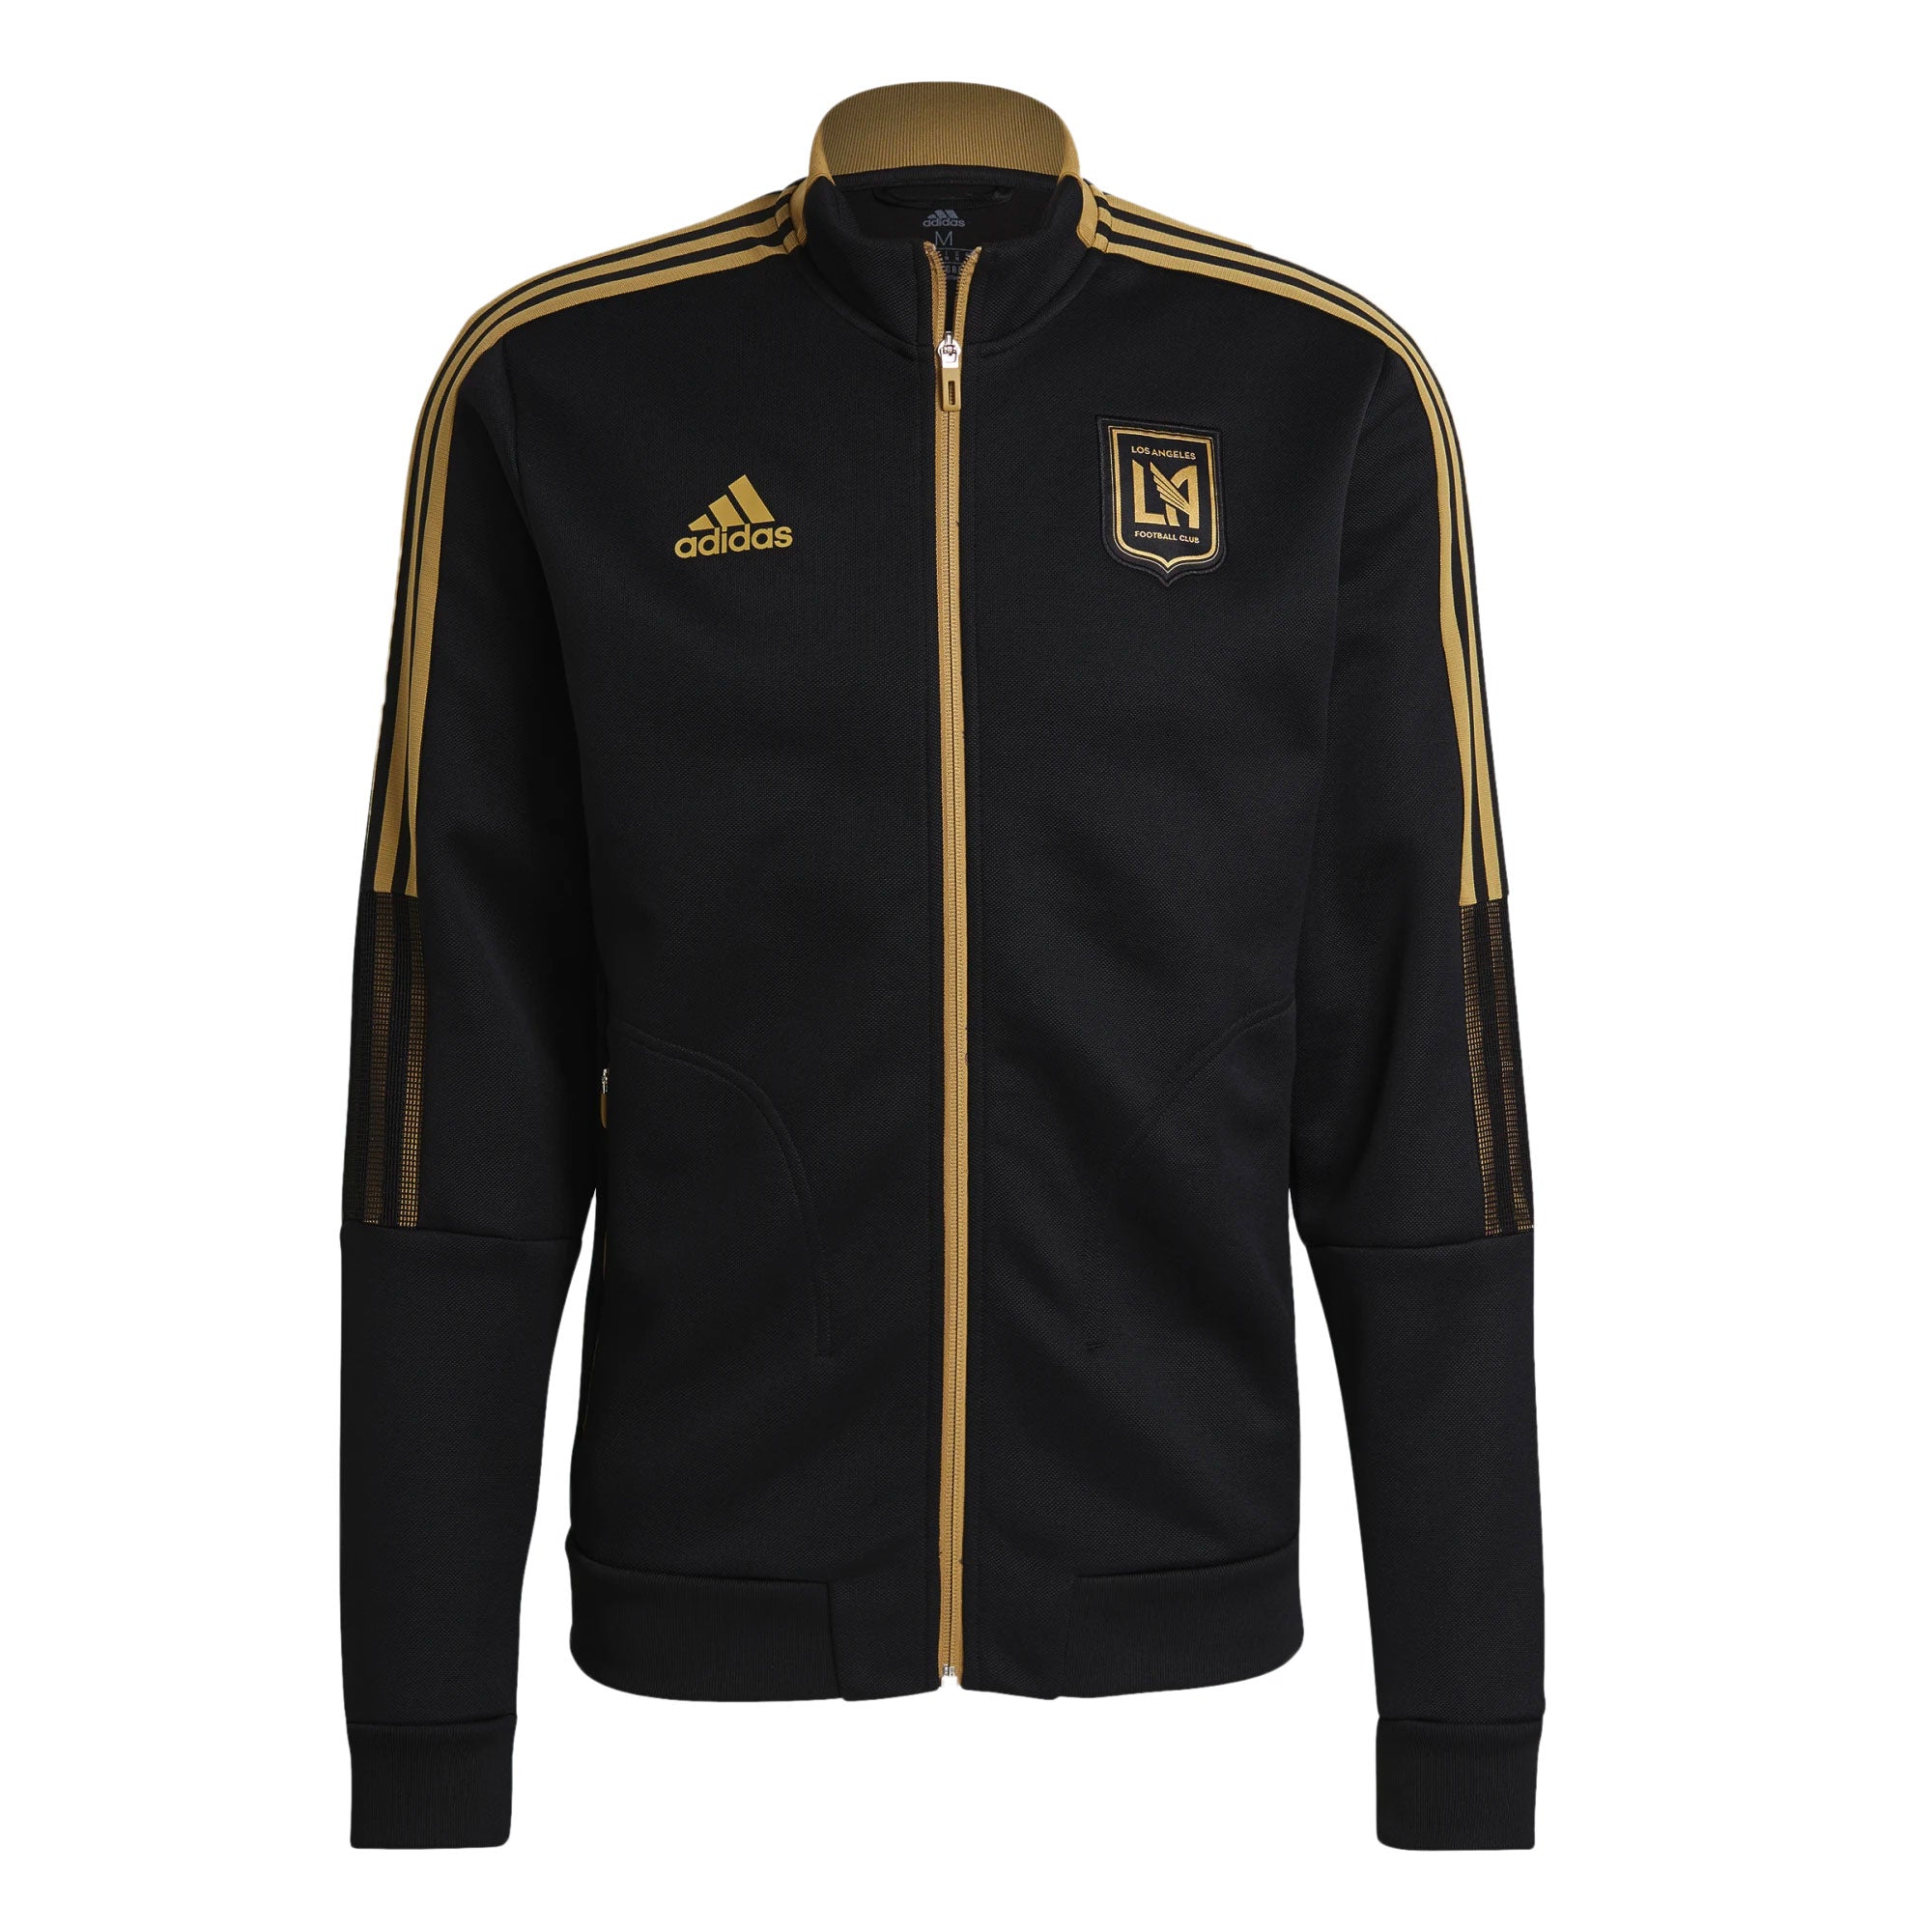 Adidas 2021-22 LAFC Warm-Up Top - Trace Pink